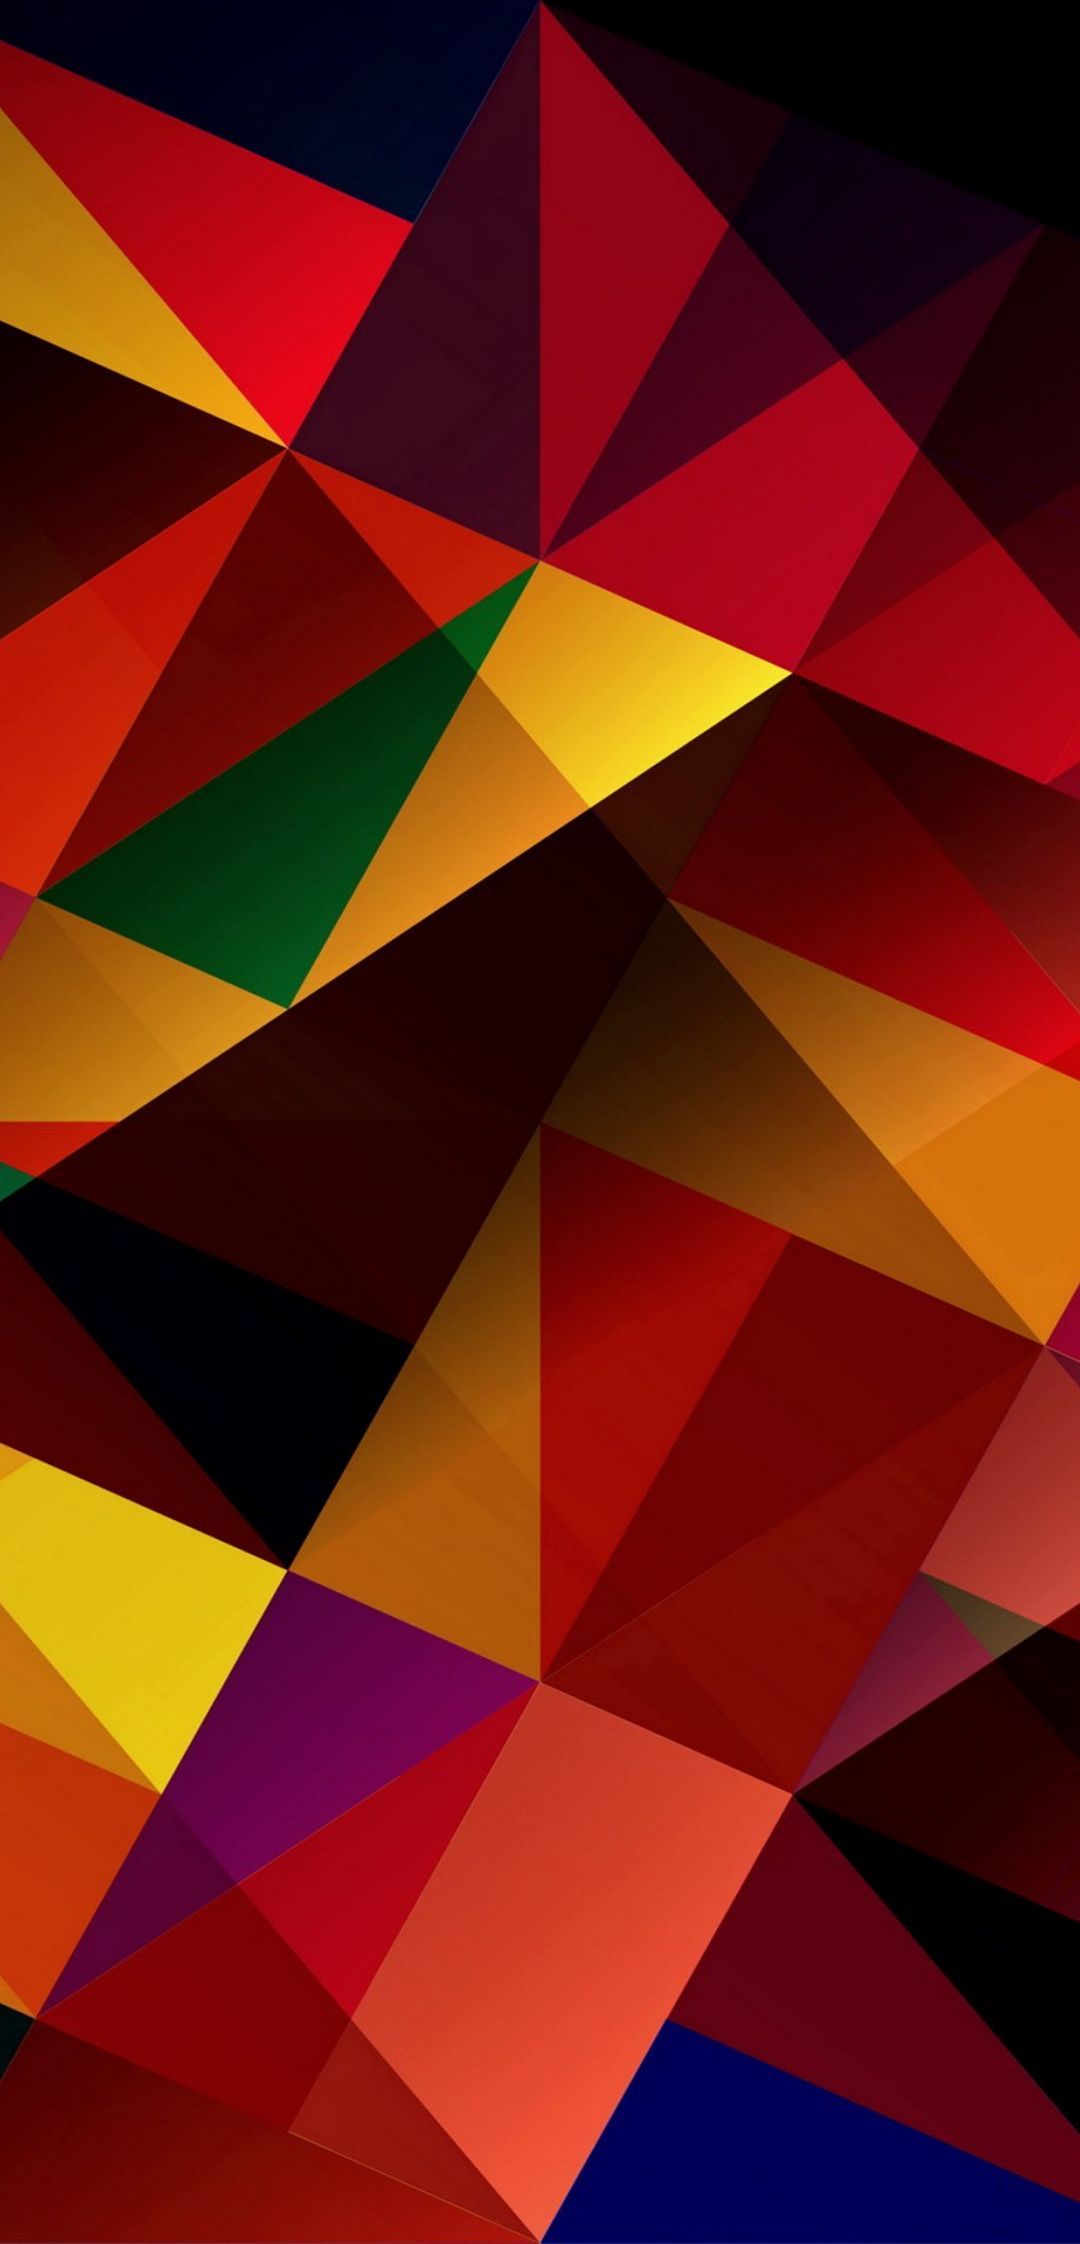 Abstract Multi Colored Background. Vector, EPS10